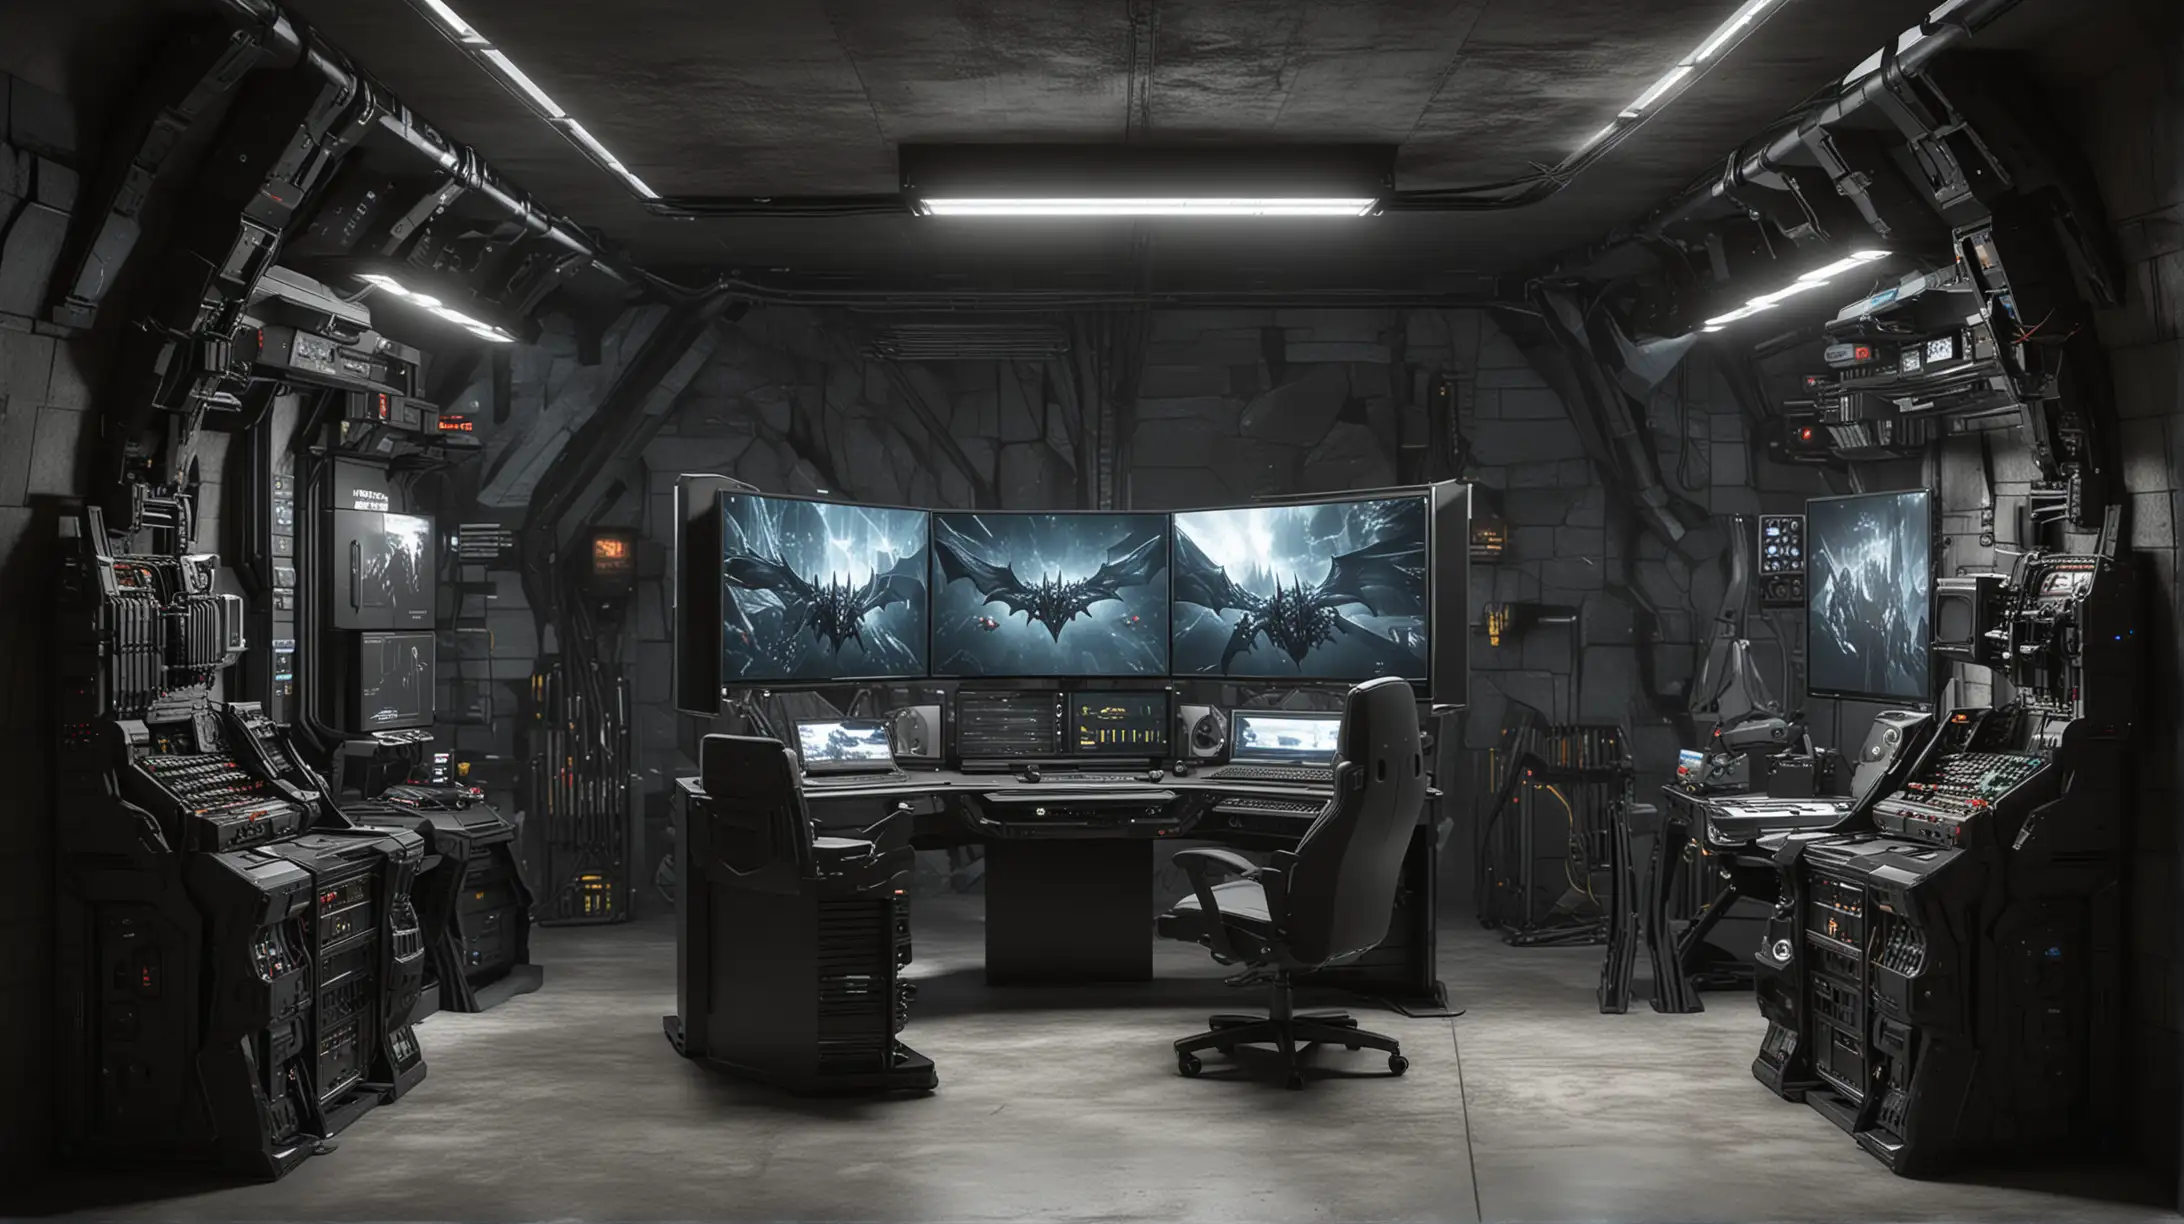 Designs for a Batcave's super elaborate advanced and complex Batcomputer-like gaming computer desk setup for gaming in  Batcave-like medium-sized room.